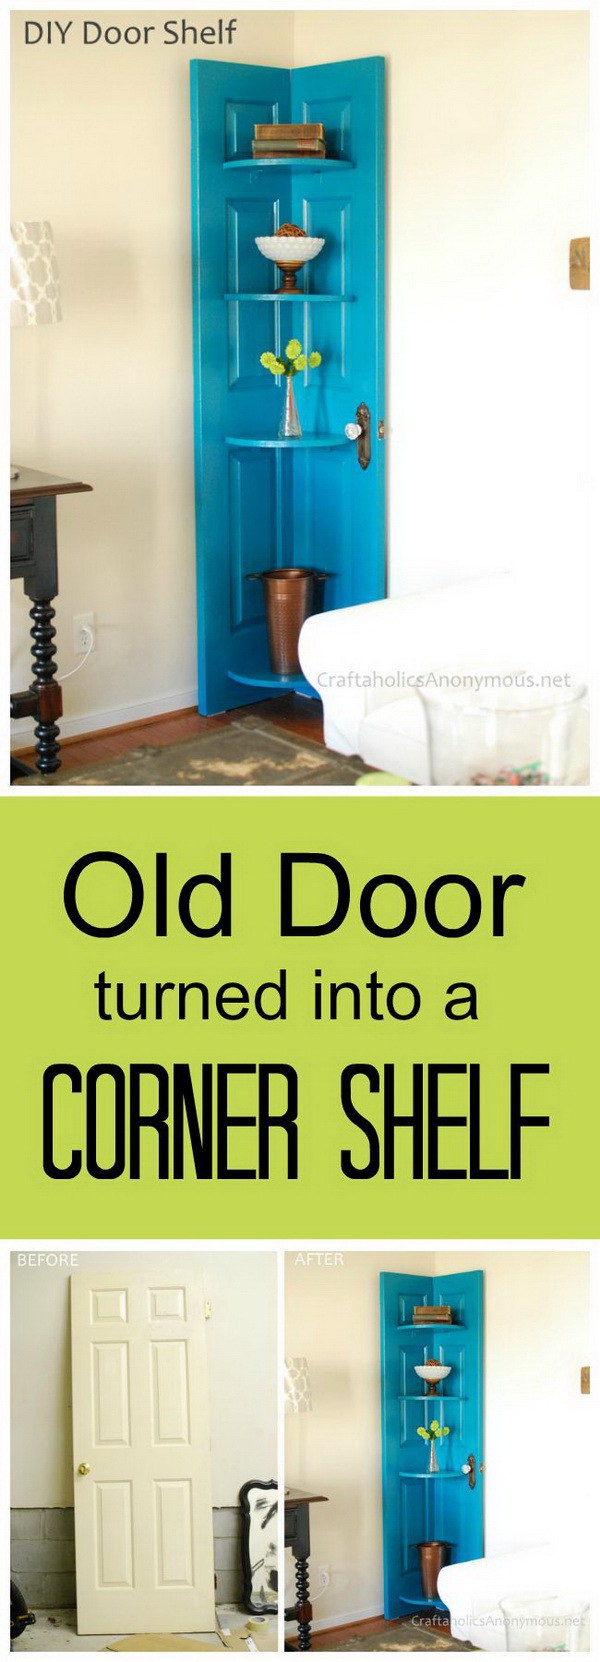 DIY Door Corner Shelf: Turn an old door that you don't want to use into this gorgeous and functional corner shelf for any room in your house with some spray paint and a bit of woodworking skills!